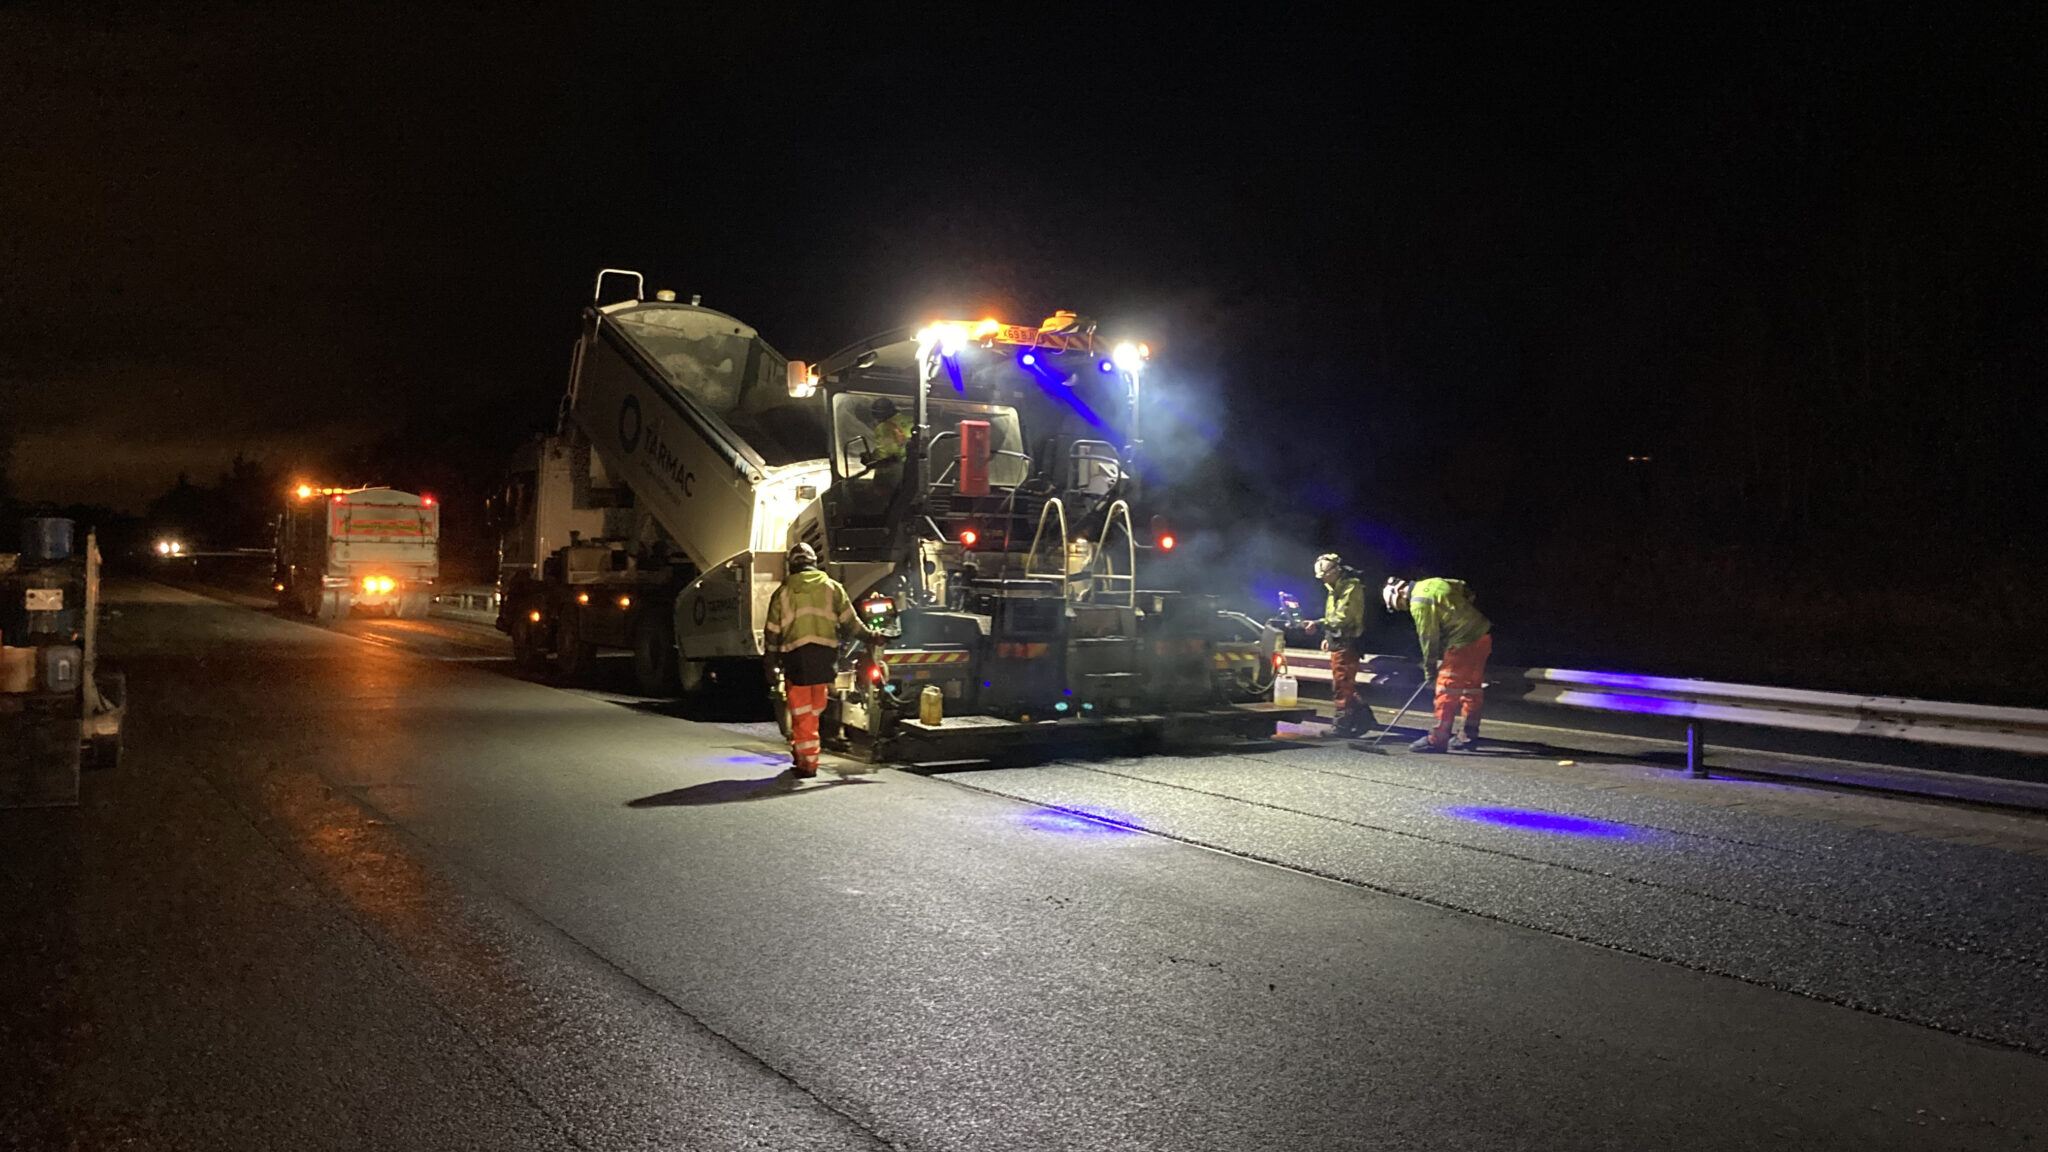 RESURFACING IMPROVEMENTS ON THE A68 SOUTH OF JEDBURGH